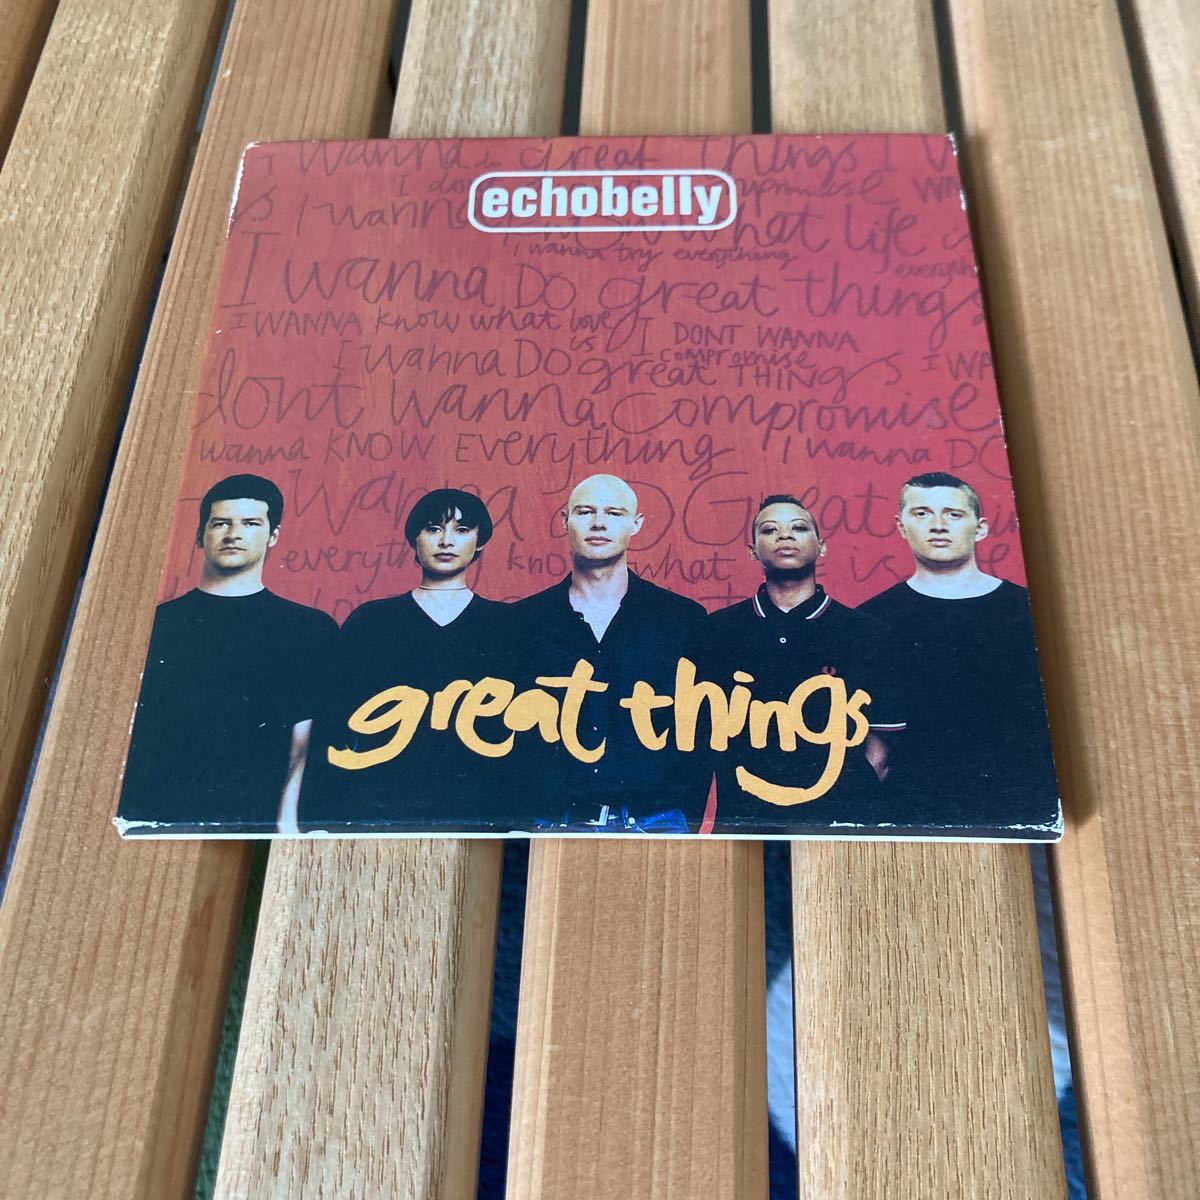 echobelly、great things、2枚組CD、ギターポップ、インディロック、indie rock_画像1